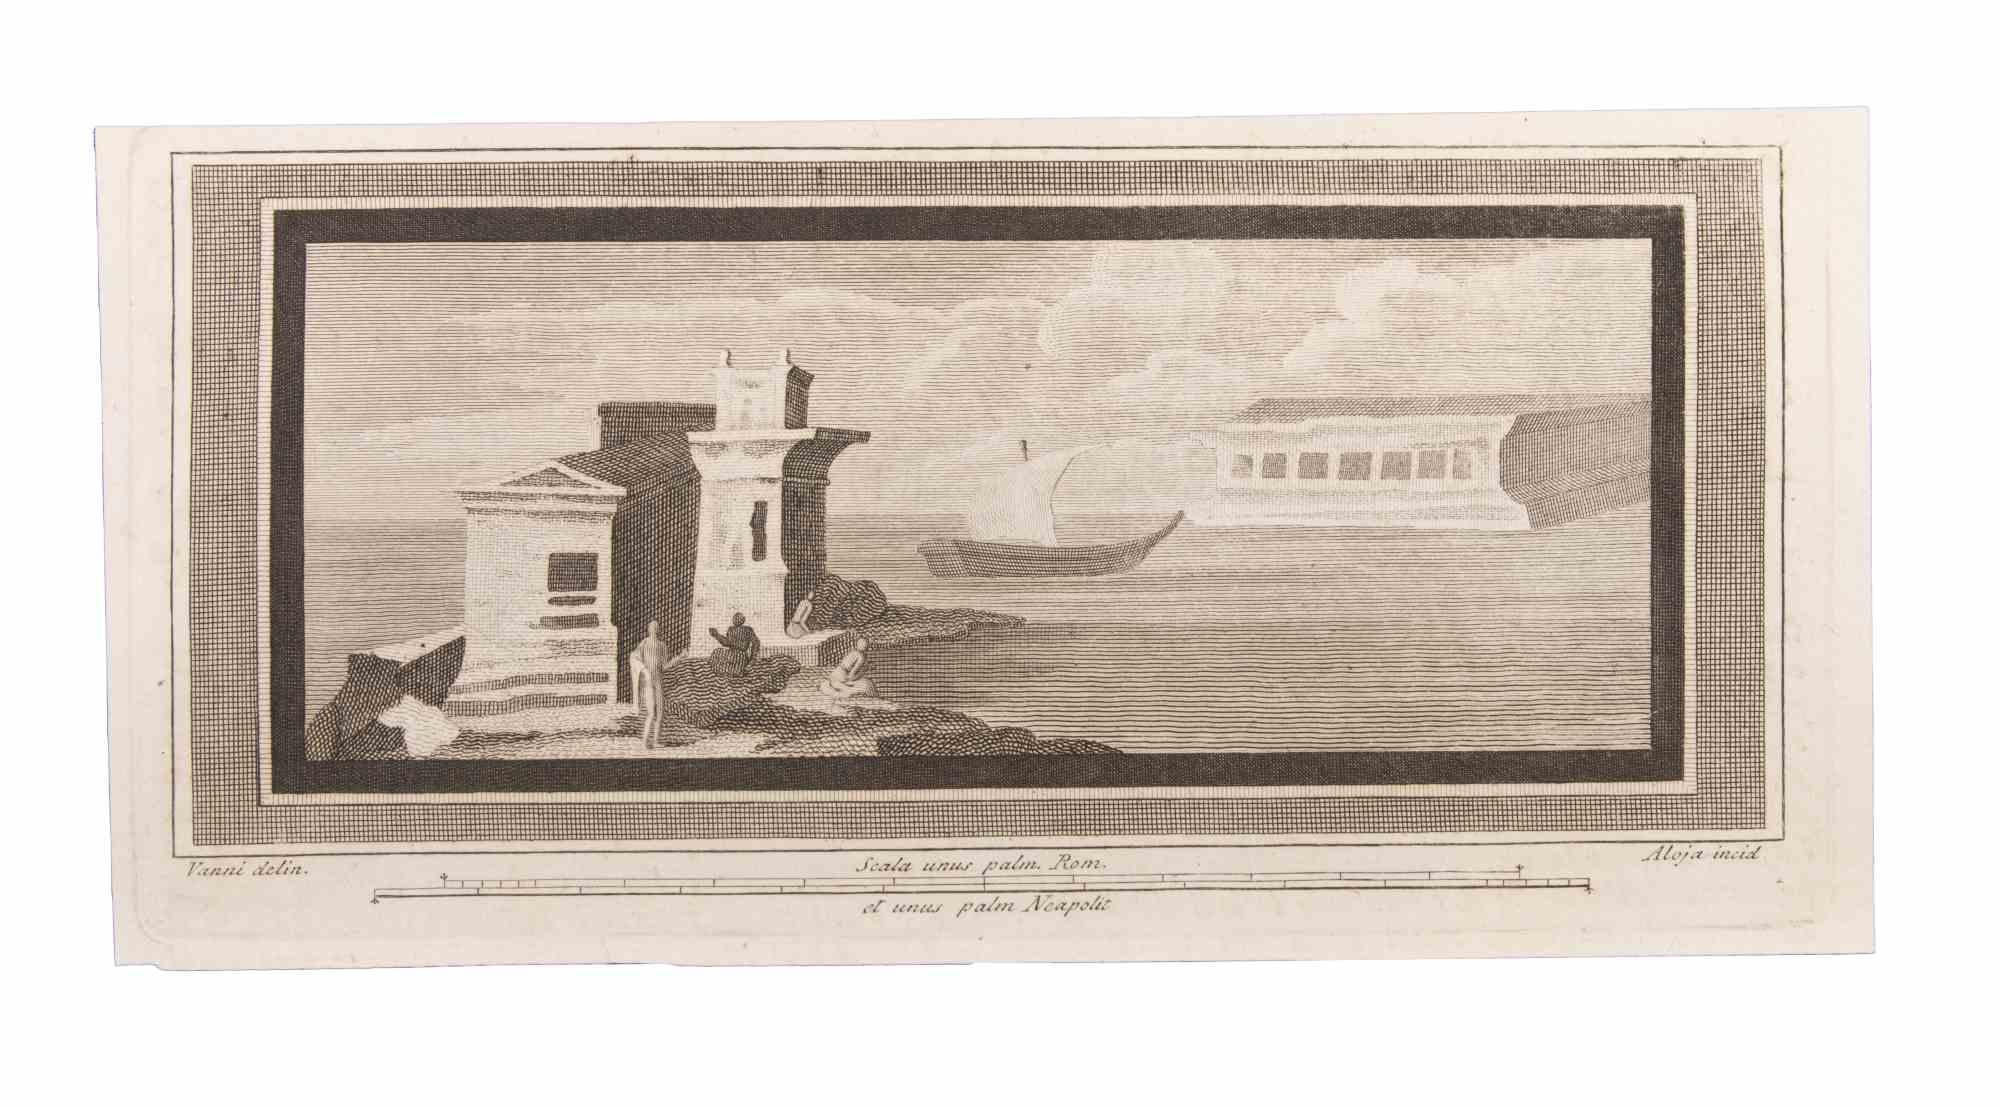 Seascape With Monument and Figures is an Etching realized by Luigi Aloja (1783-1837).

The etching belongs to the print suite “Antiquities of Herculaneum Exposed” (original title: “Le Antichità di Ercolano Esposte”), an eight-volume volume of